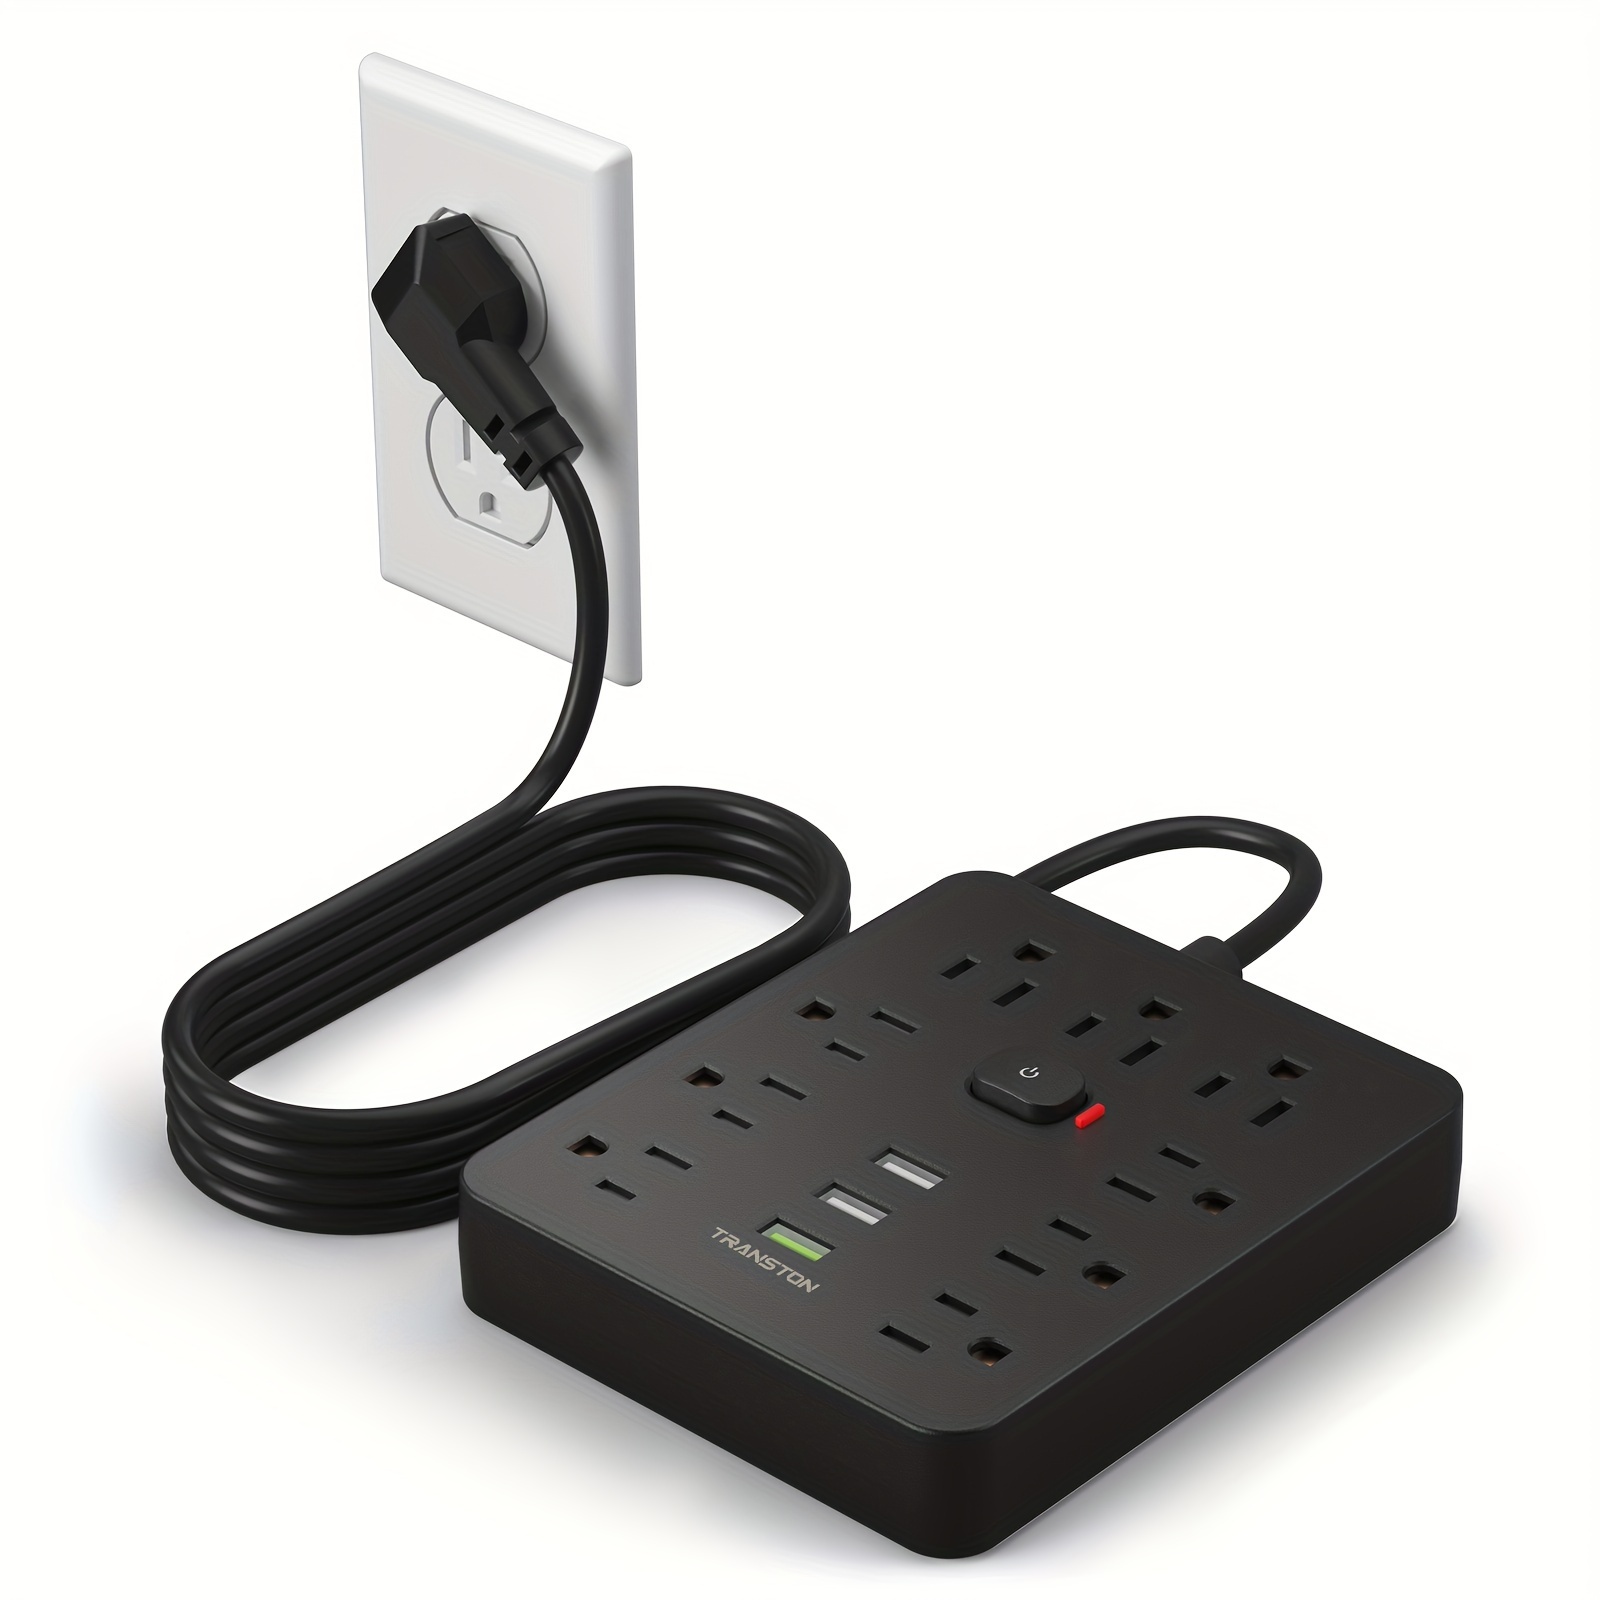 9 outlets 3 usb ports fireproof surge protector power strip with 5ft extension cord wall mountable desktop charging station for home office